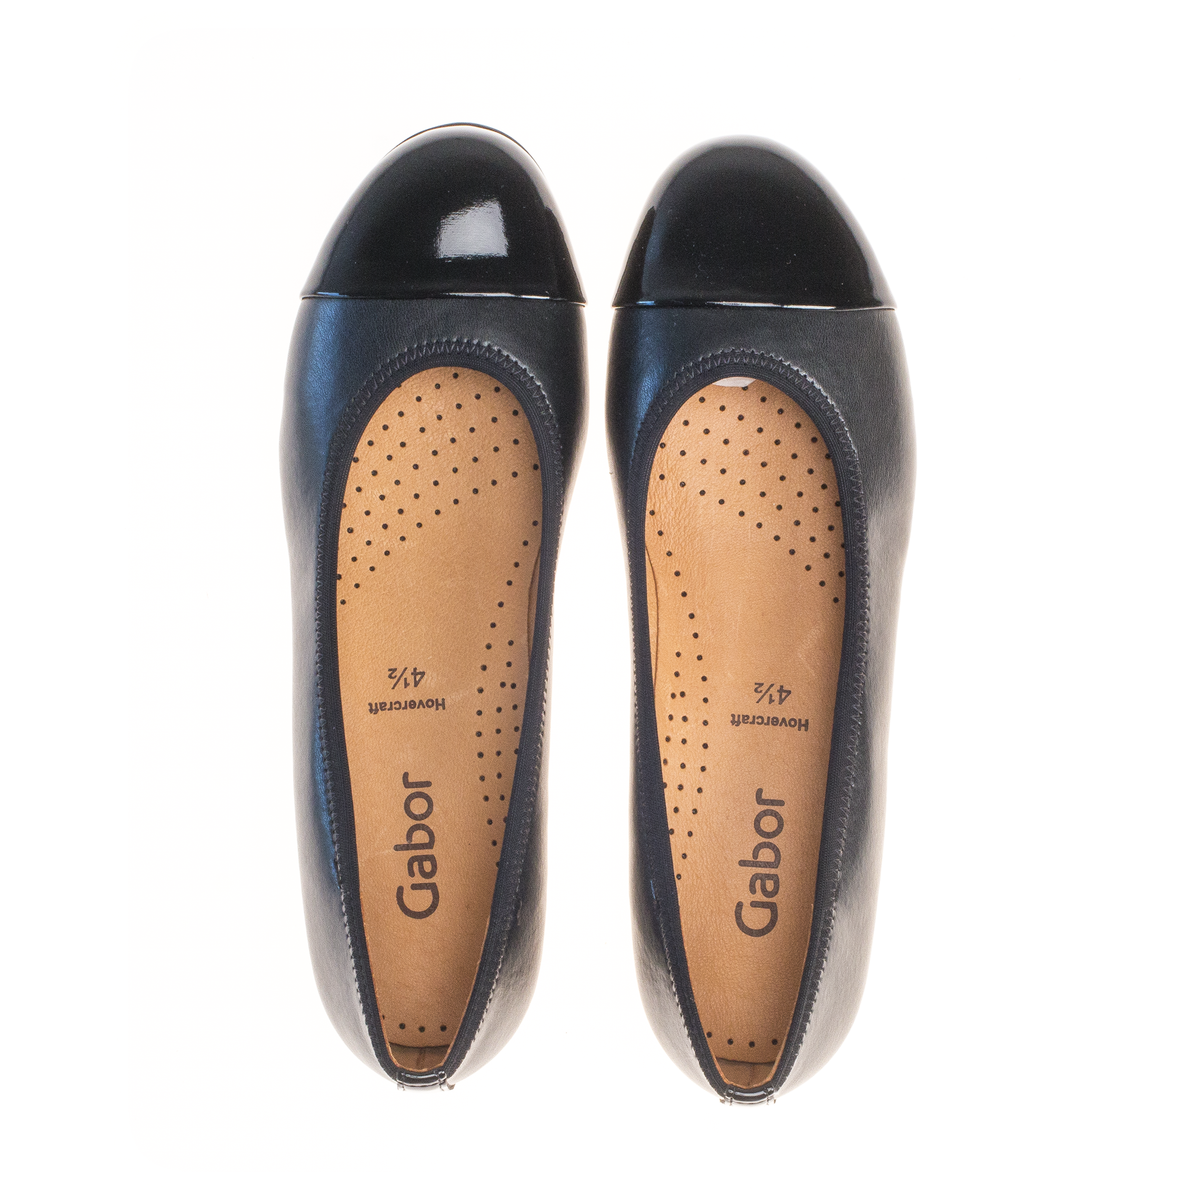 Gabor Shoes USA Style: 24.161.57